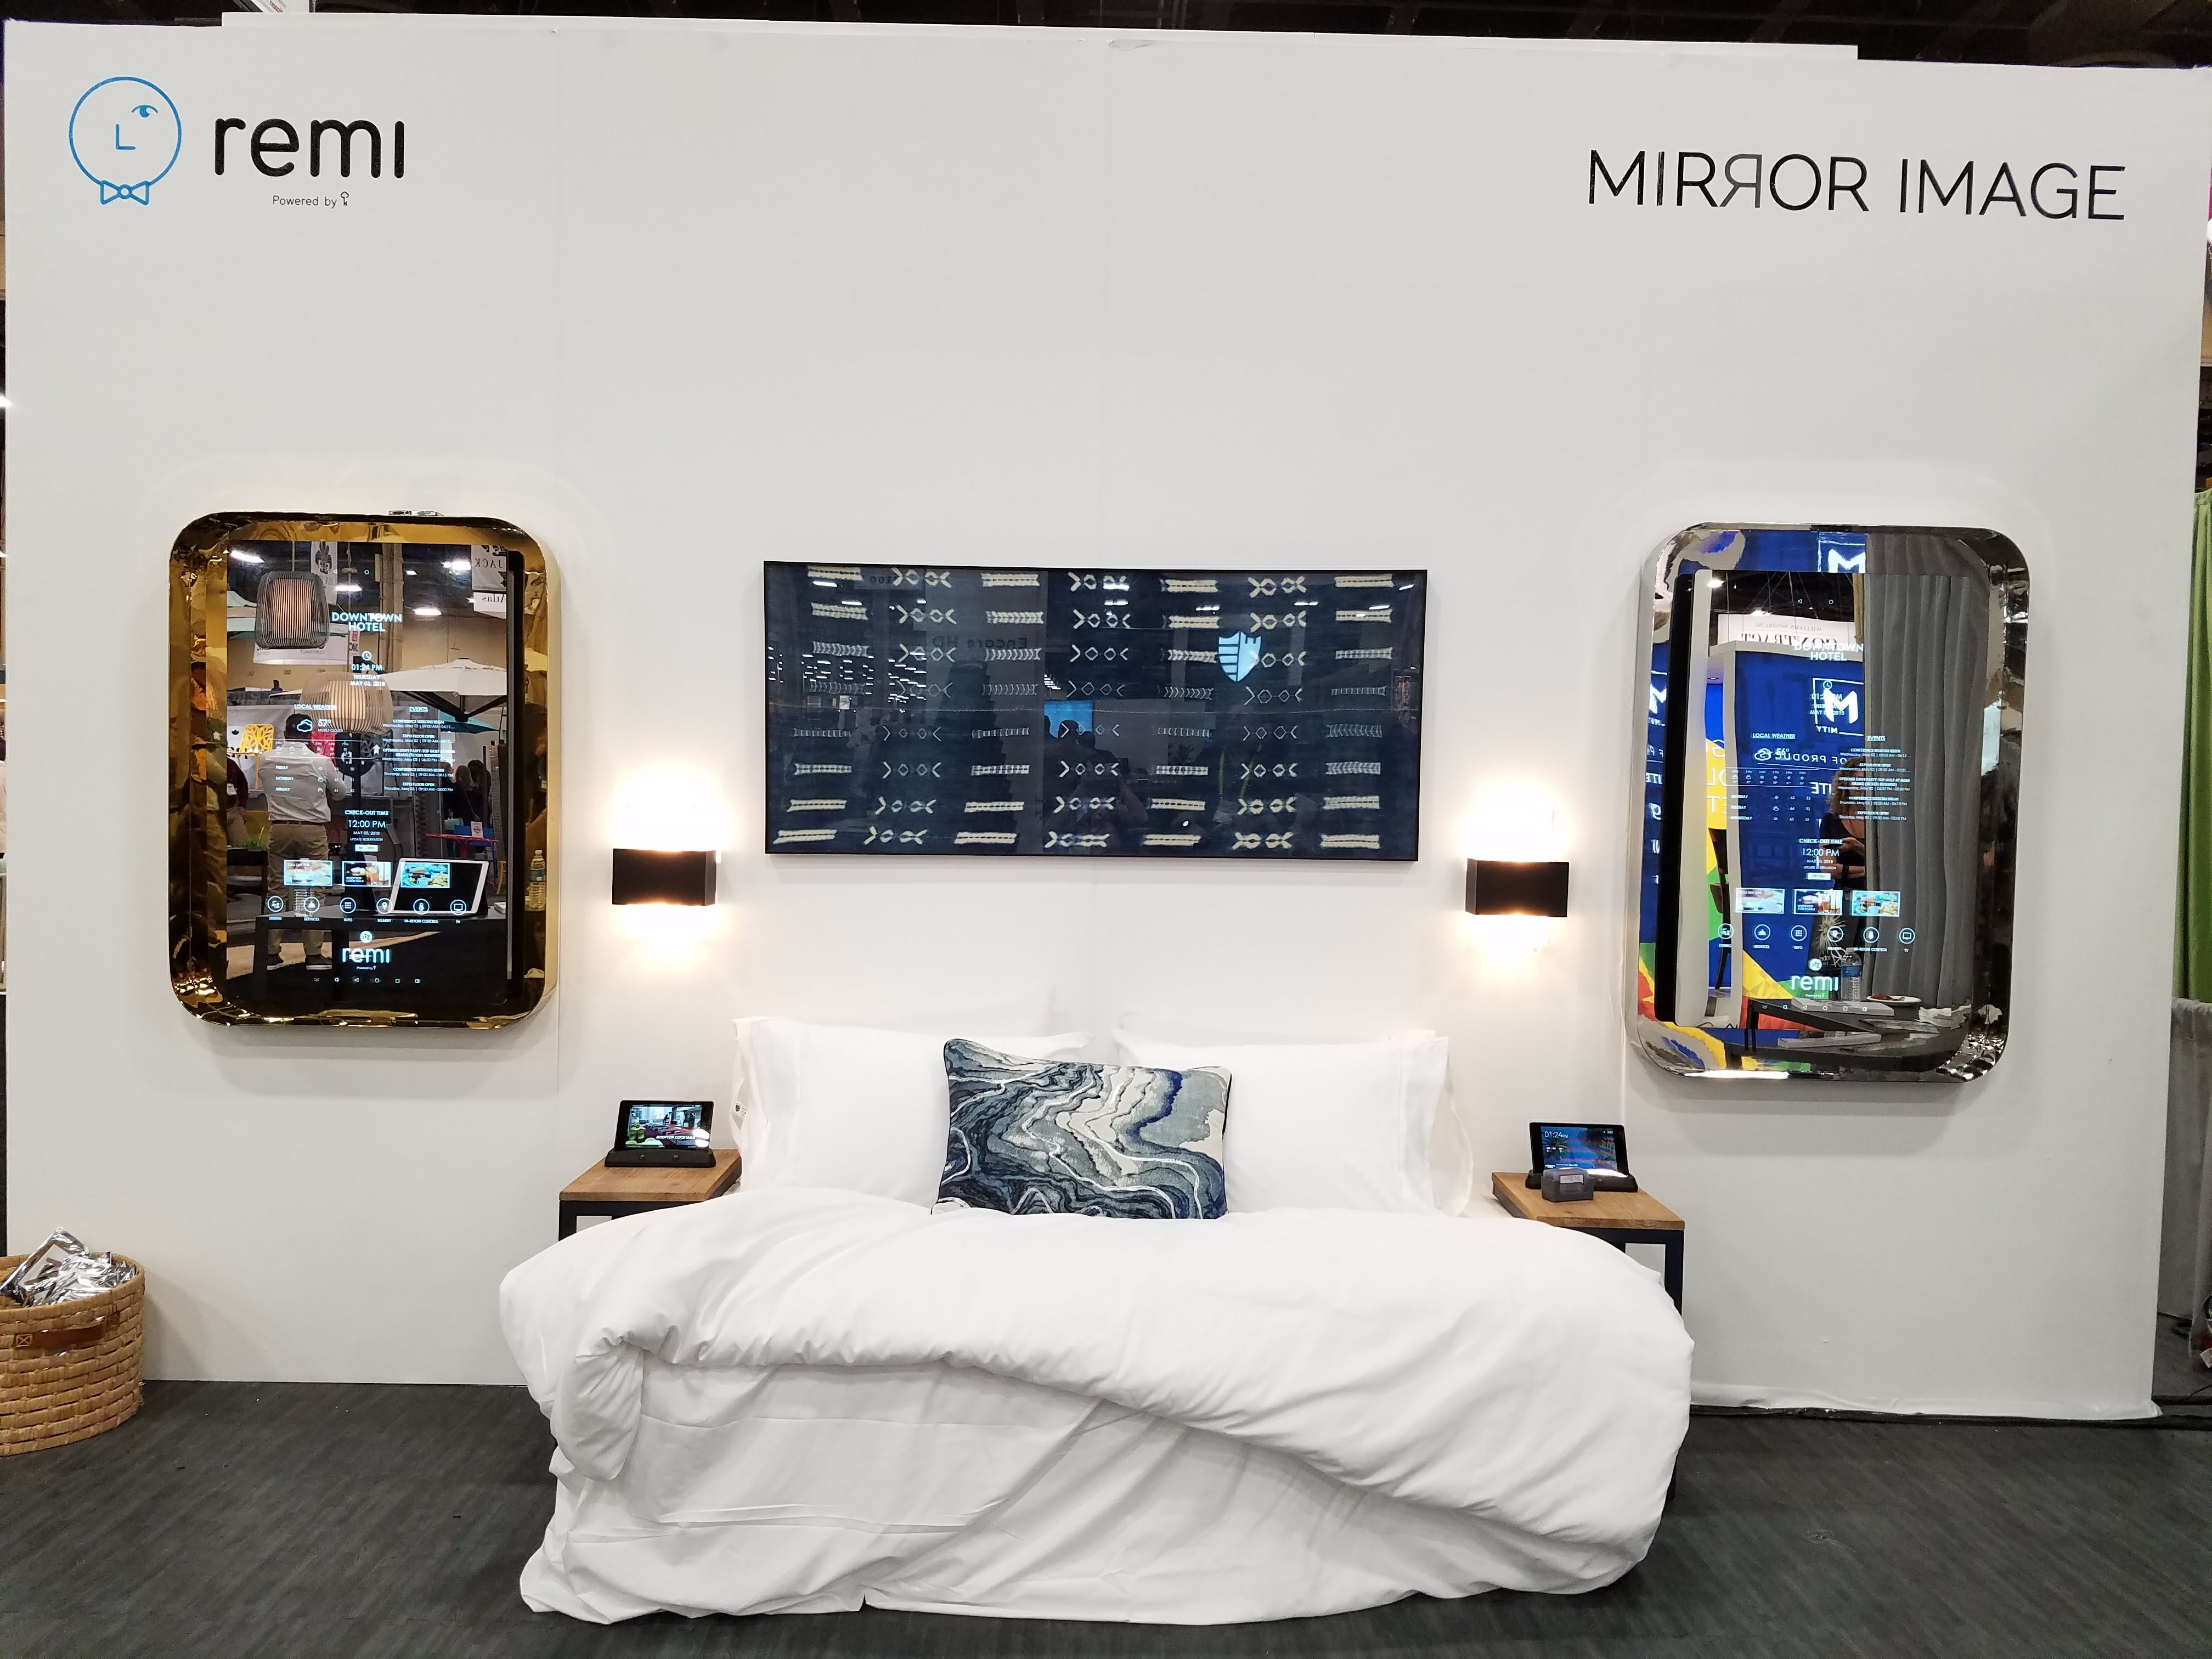 Remi mirrors were prominently displayed at HD Expo earlier this month